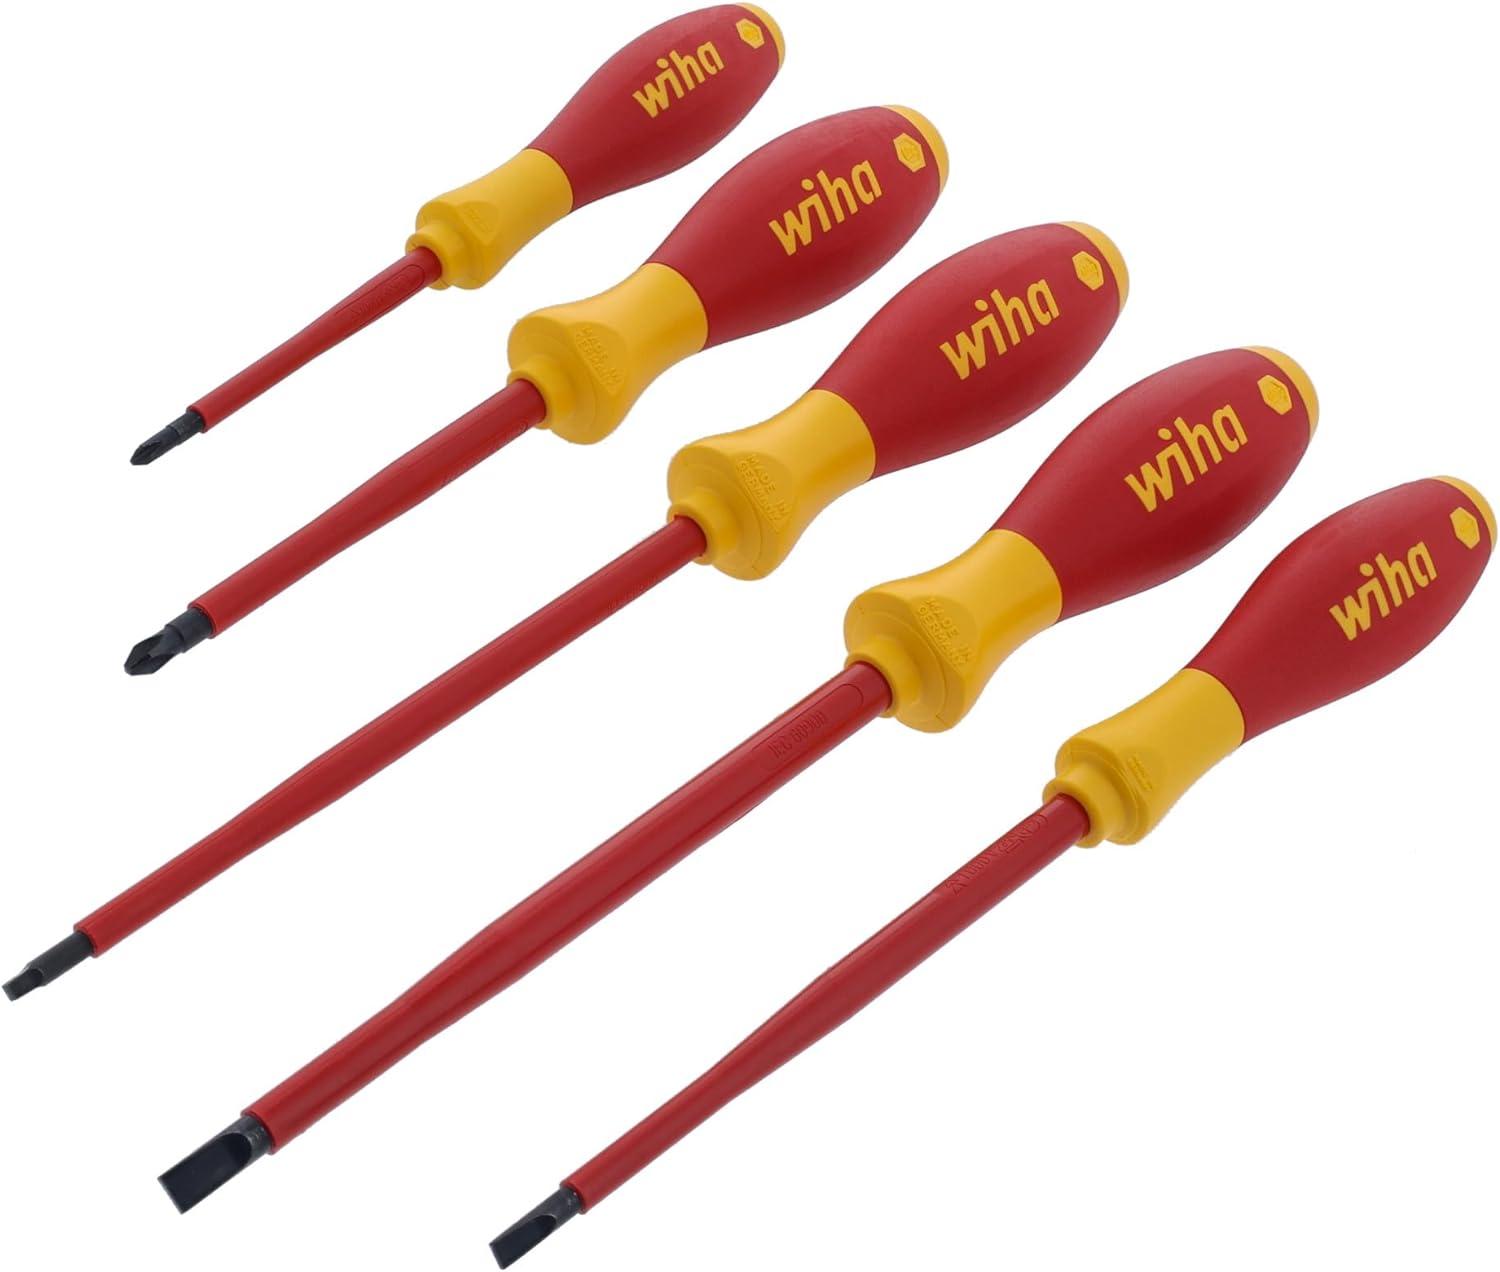 Wiha 32059 5 Piece Insulated SoftFinish Slotted Philips Screwdriver for $29.99